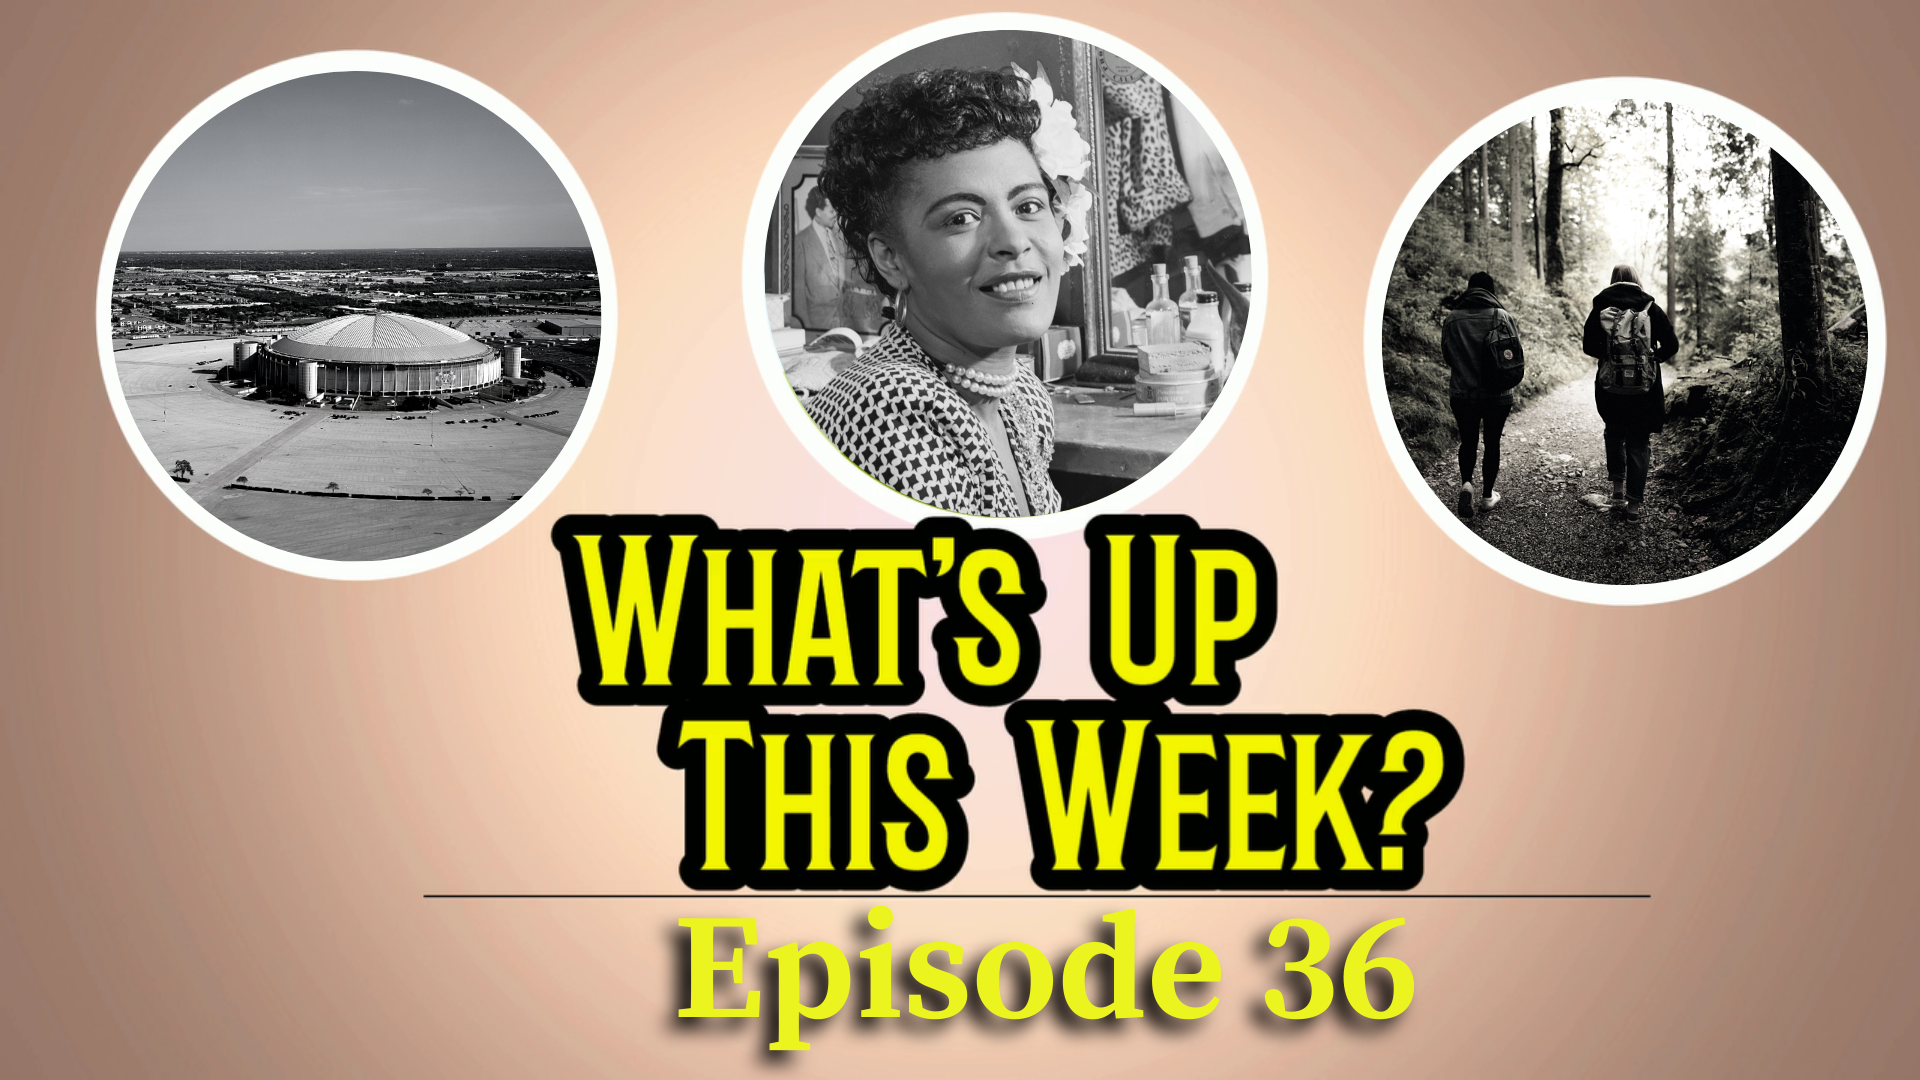 Text: What's Up This Week? Episode 36. 3 images in circles: the Astrodome, Billie Holiday, and 2 people walking through the woods